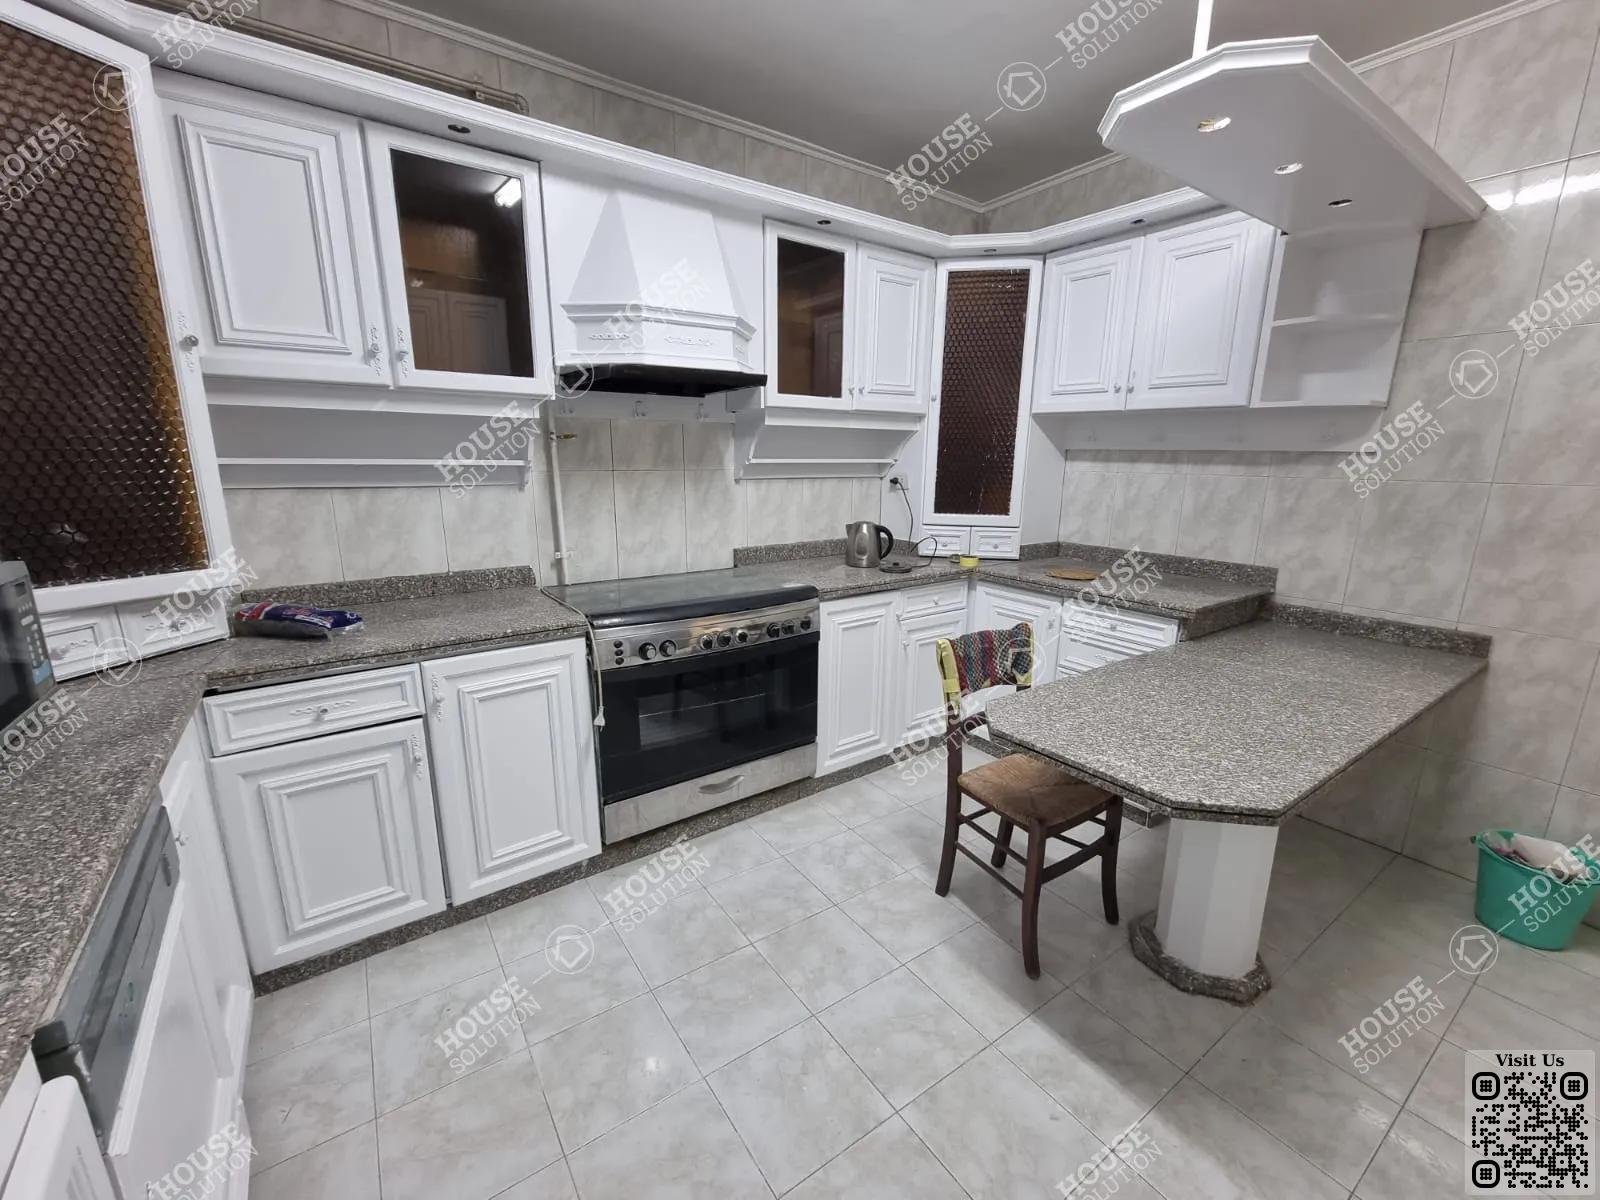 KITCHEN  @ Apartments For Rent In Maadi Maadi Sarayat Area: 270 m² consists of 3 Bedrooms 3 Bathrooms Furnished 5 stars #4889-1